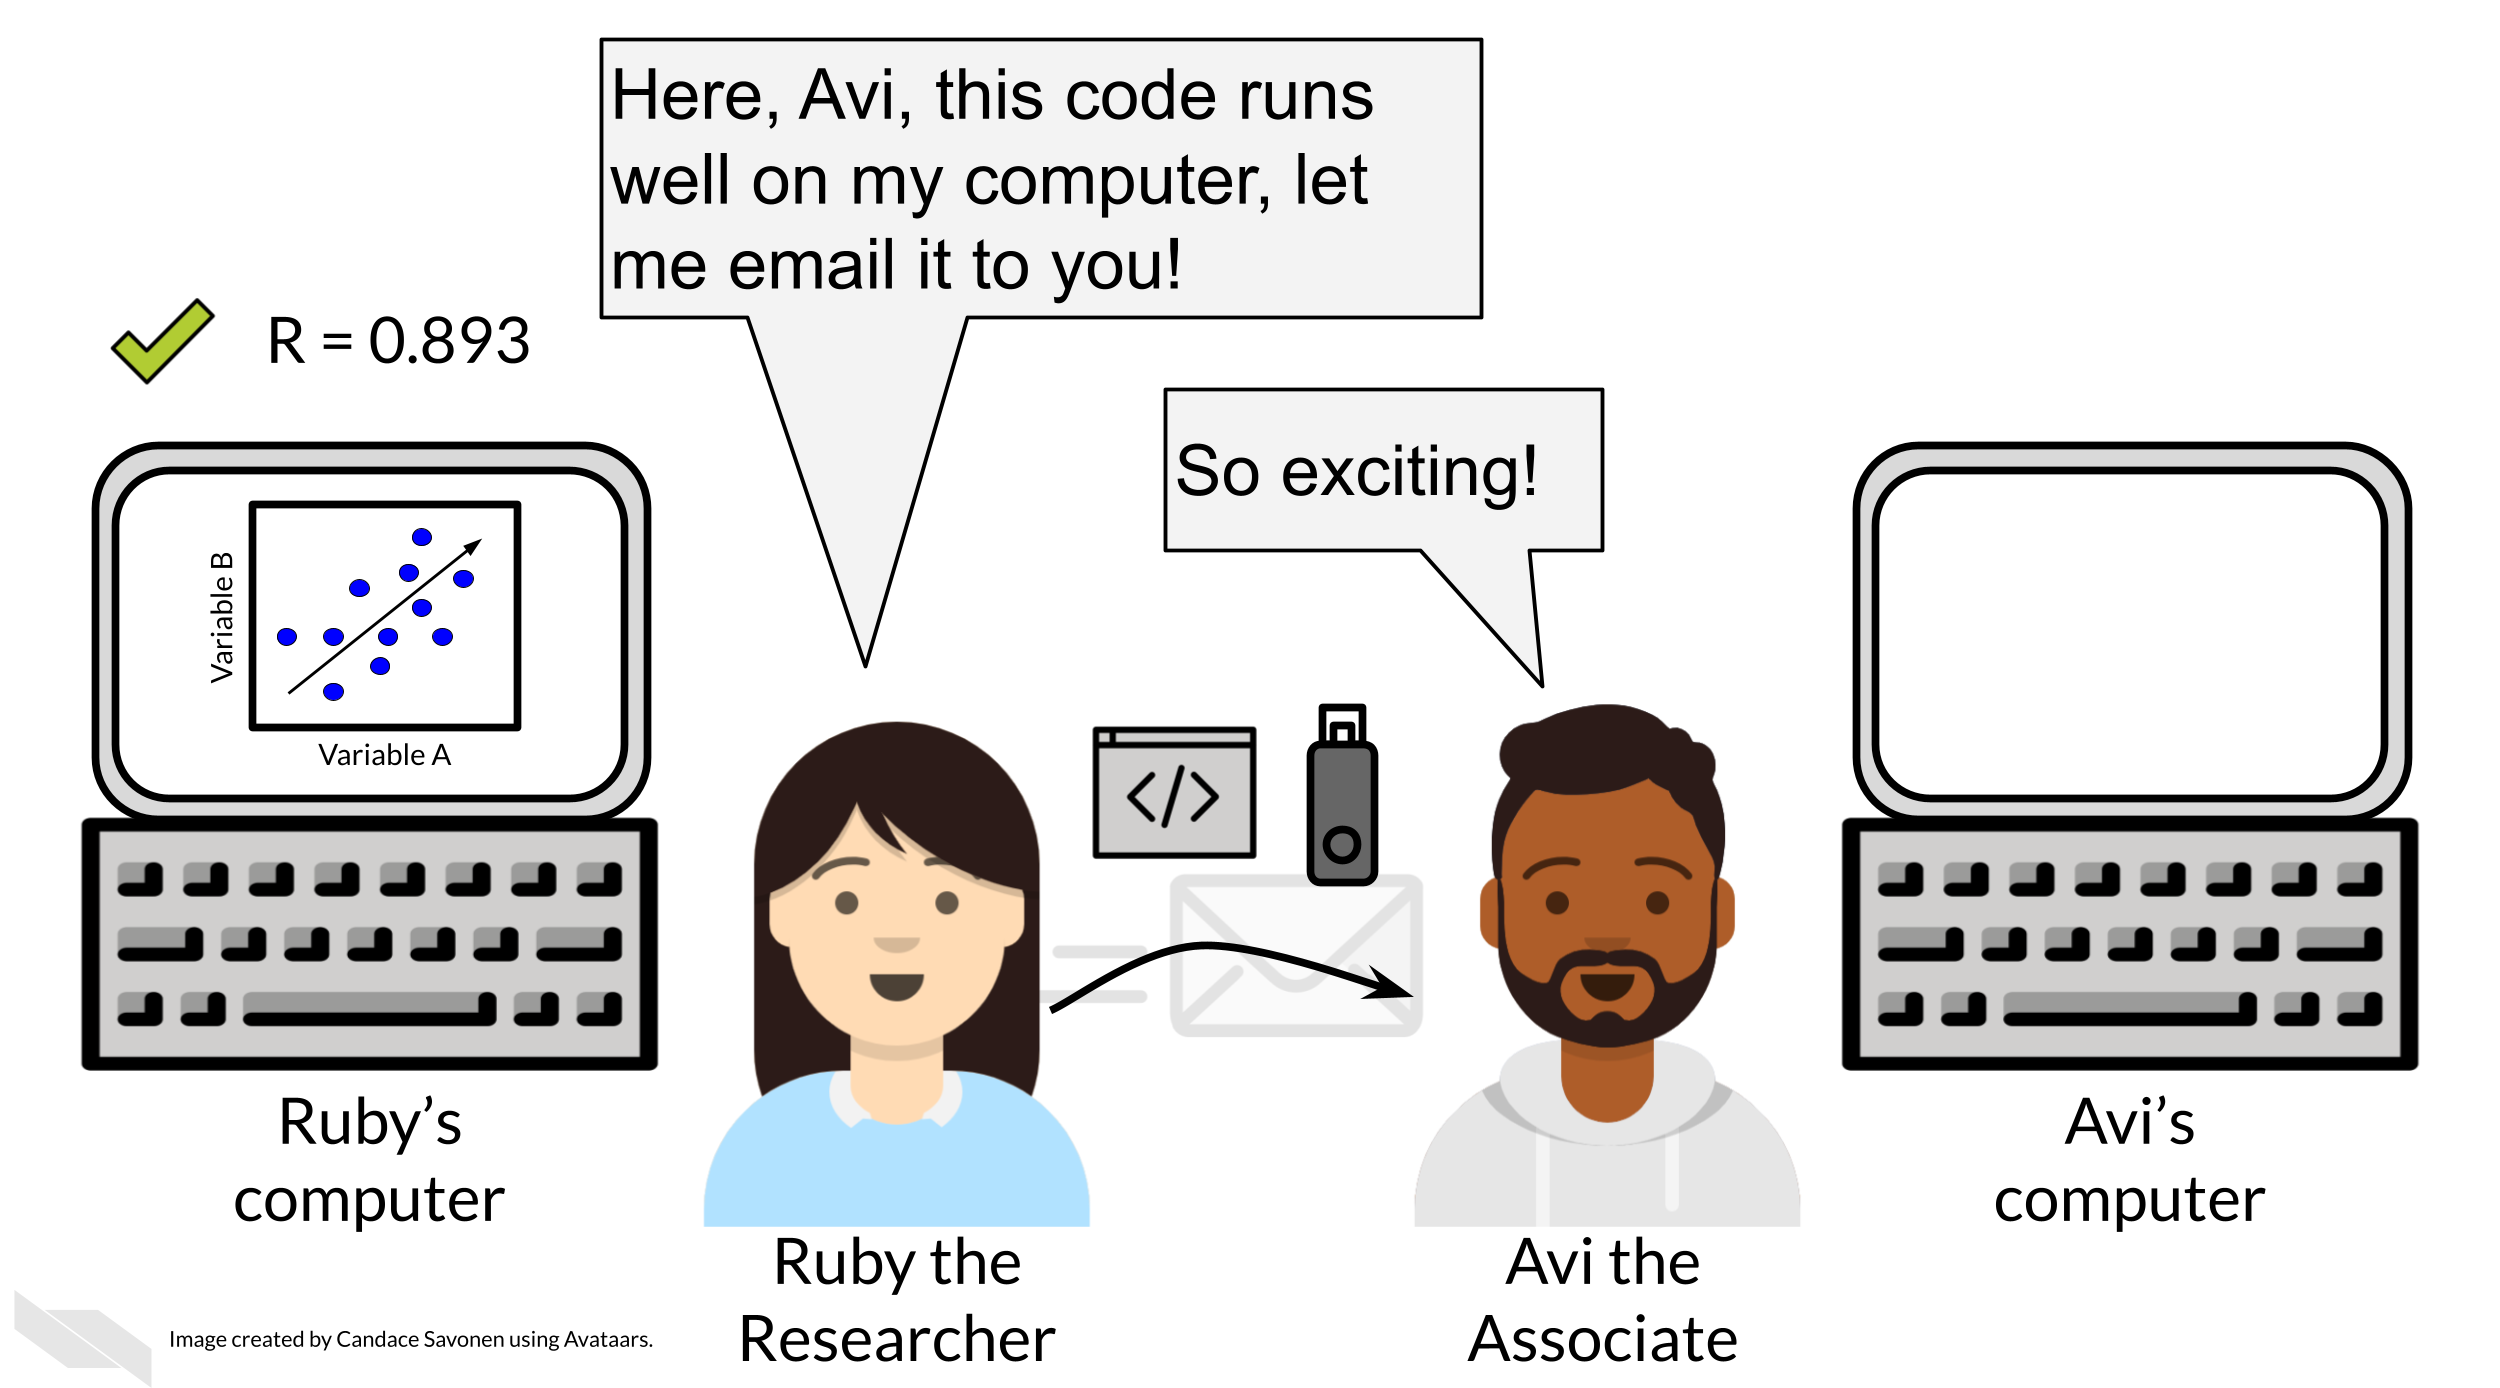 Ruby the researcher has her computer with a plot and a significant and exciting research result. Ruby says 'Here, Avi, this code runs well on my computer, let me email it to you!' Avi the associate says 'so exciting'